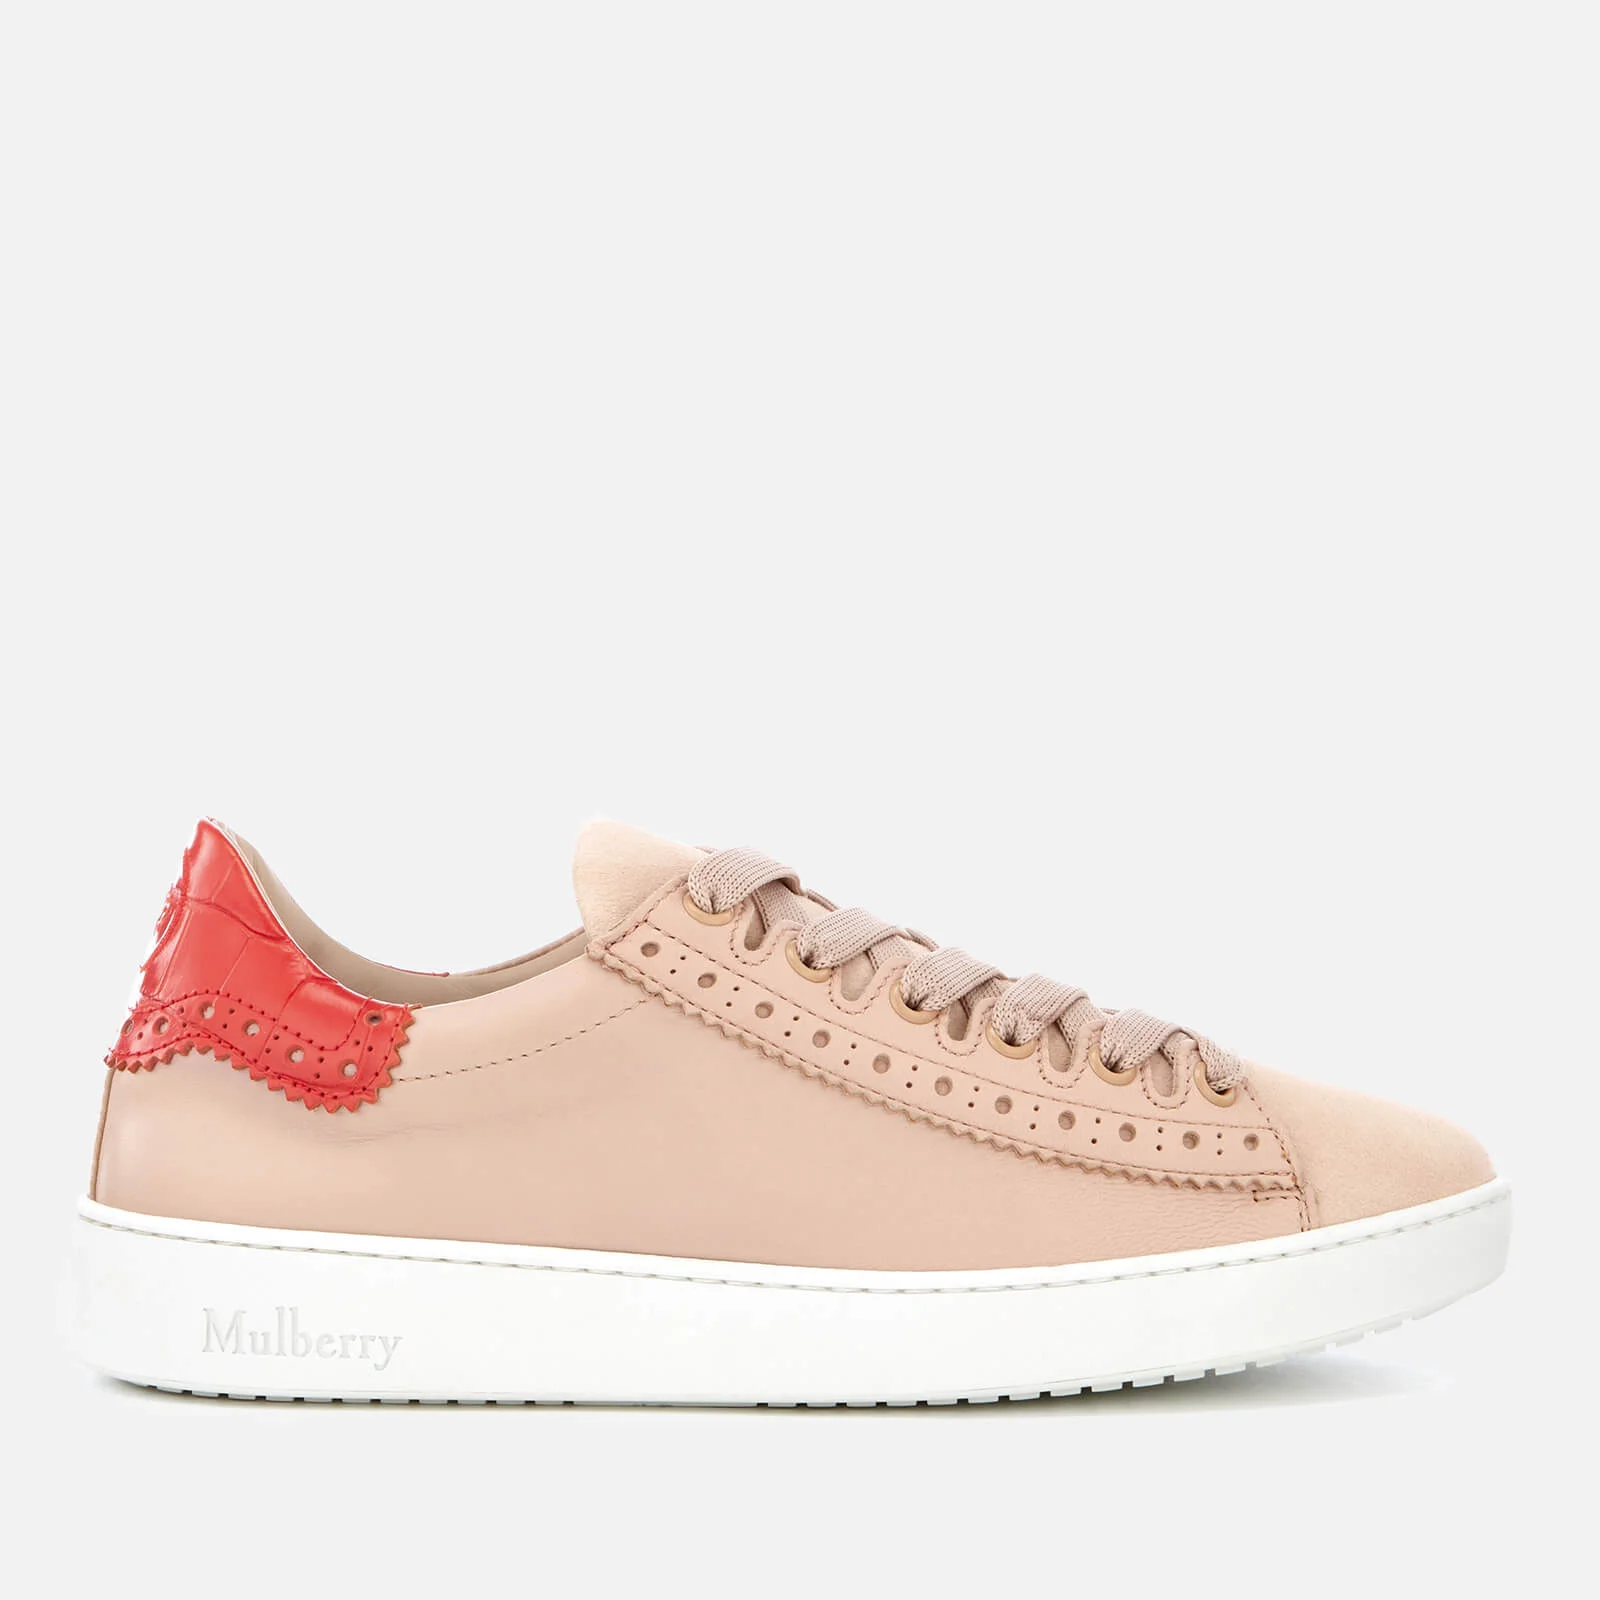 Mulberry Women's Jump Leather Low Top Trainers - Pink Image 1